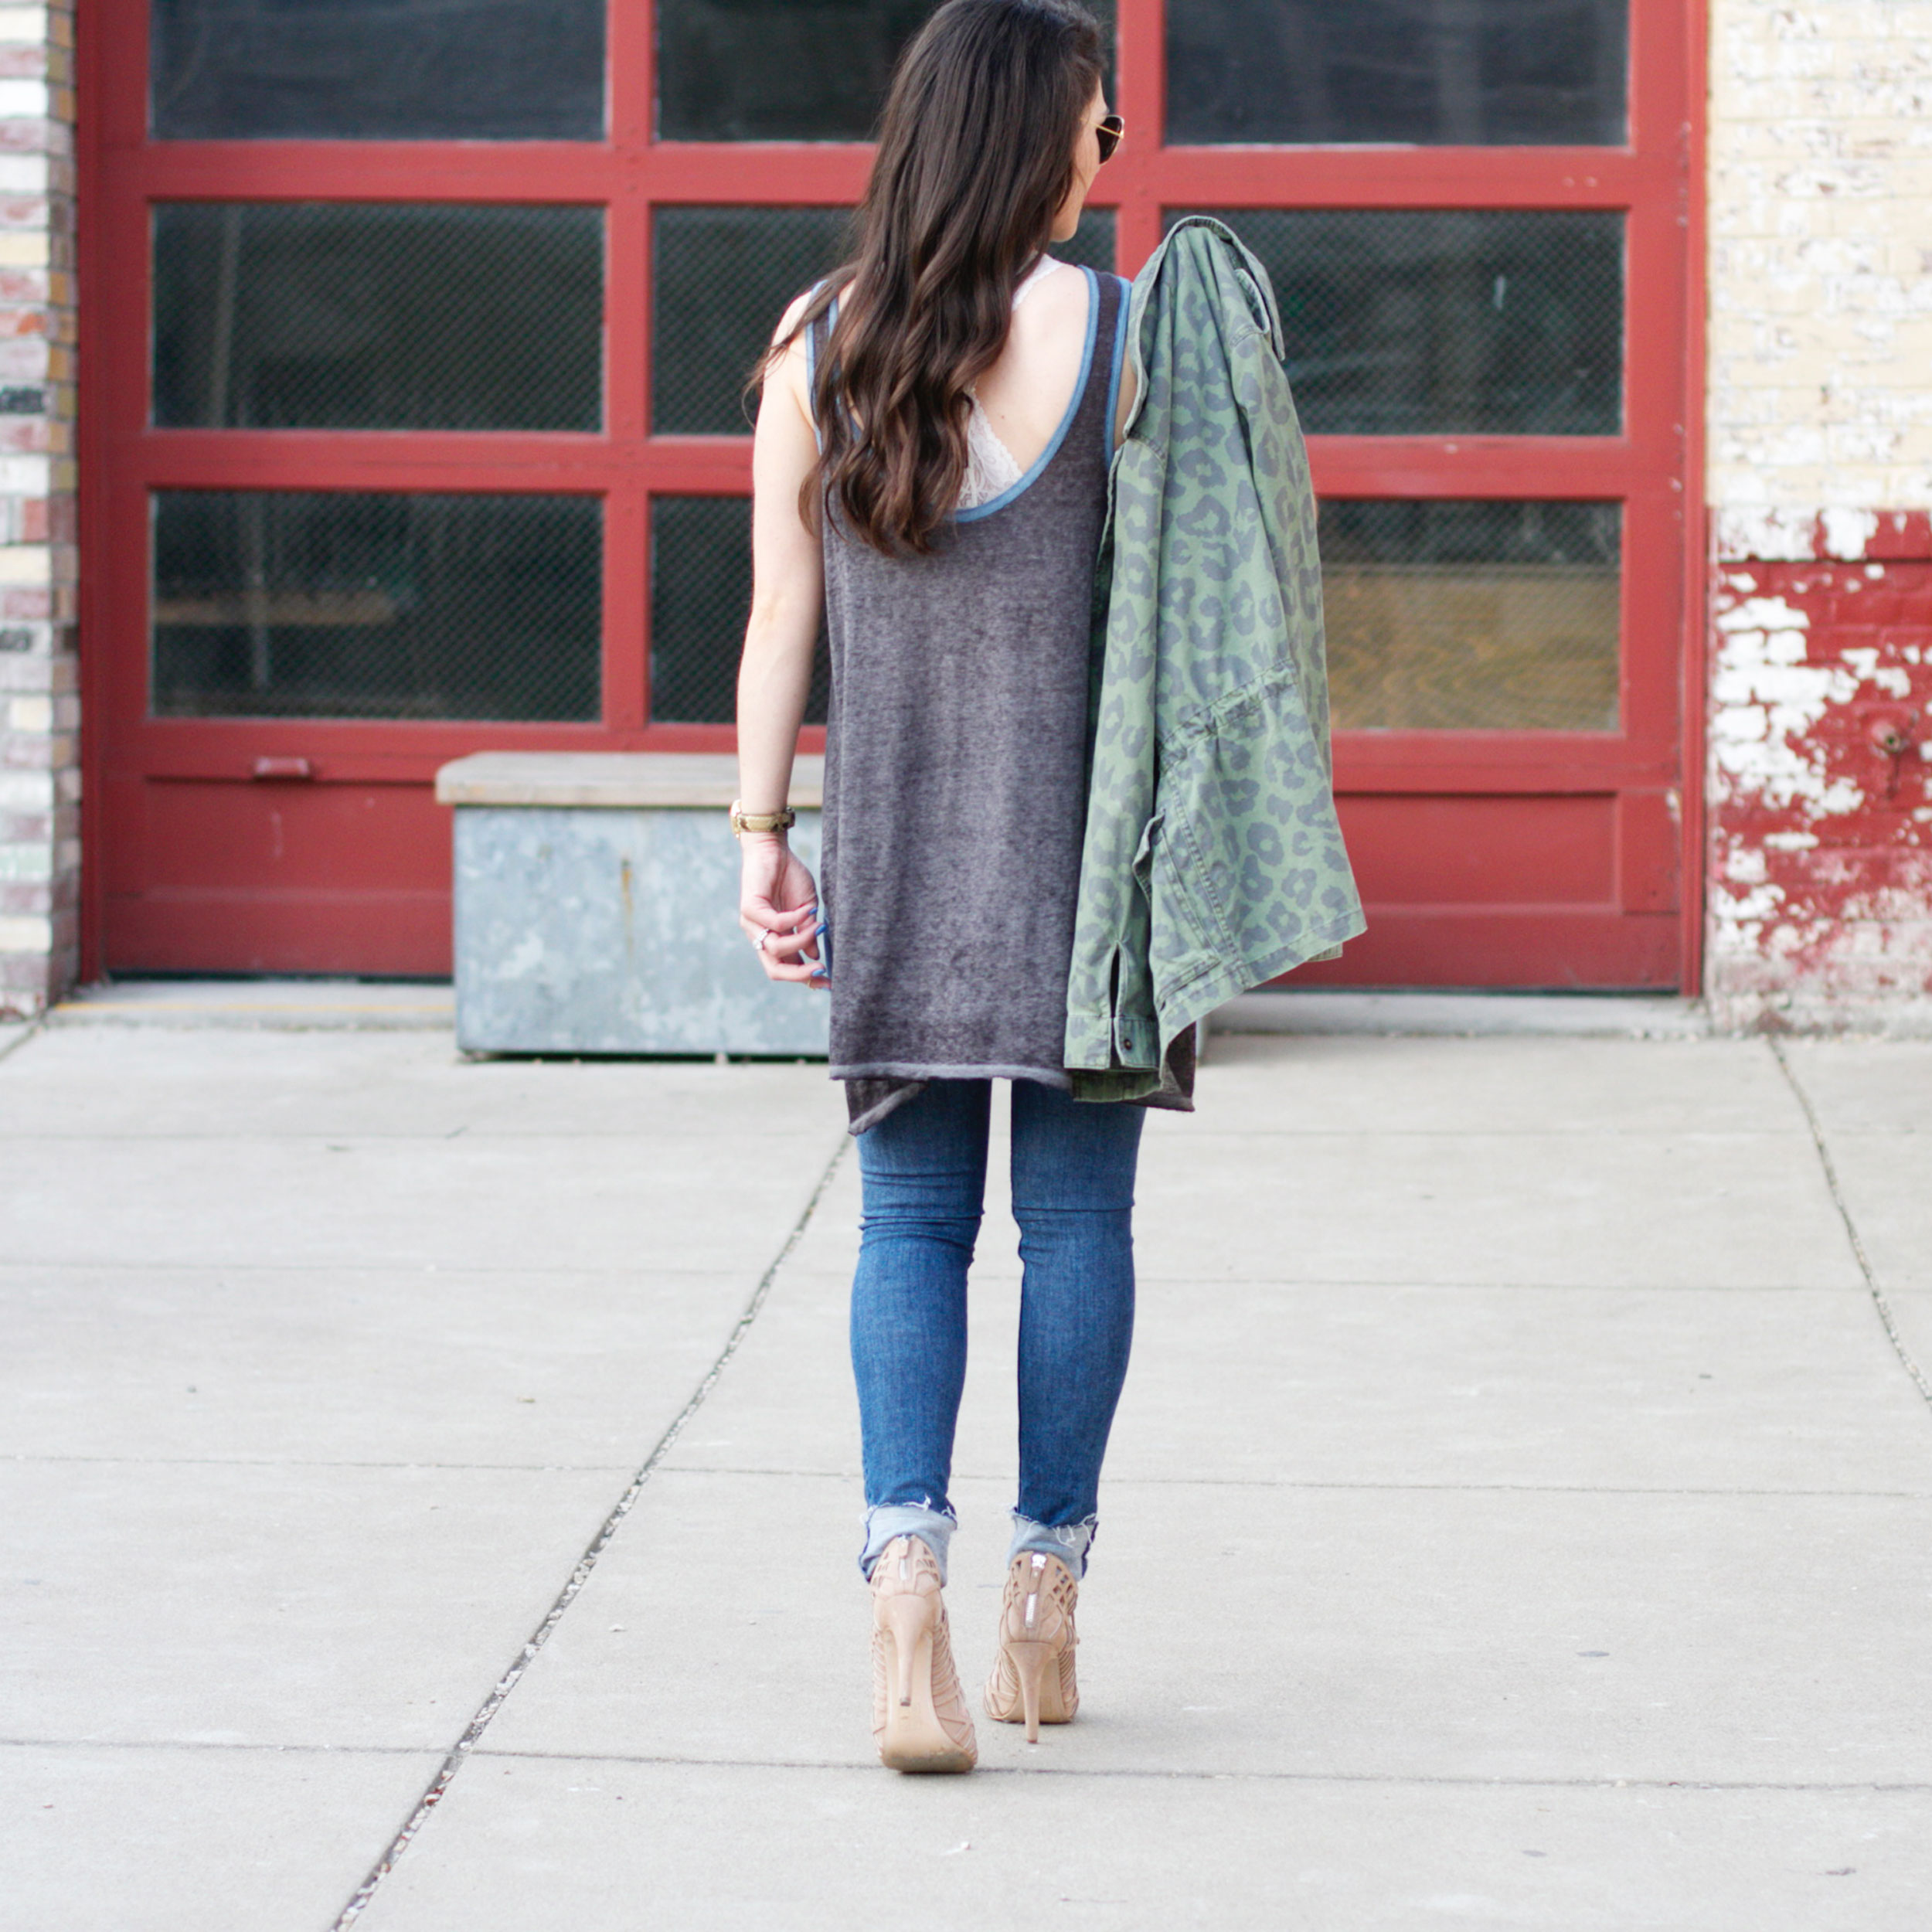 Fashion Blogger, Summer Style, Free People, Distressed Denim Skinny Jeans, Druzy Necklace, Dolce Vita Caged Sandals, Green Anorak